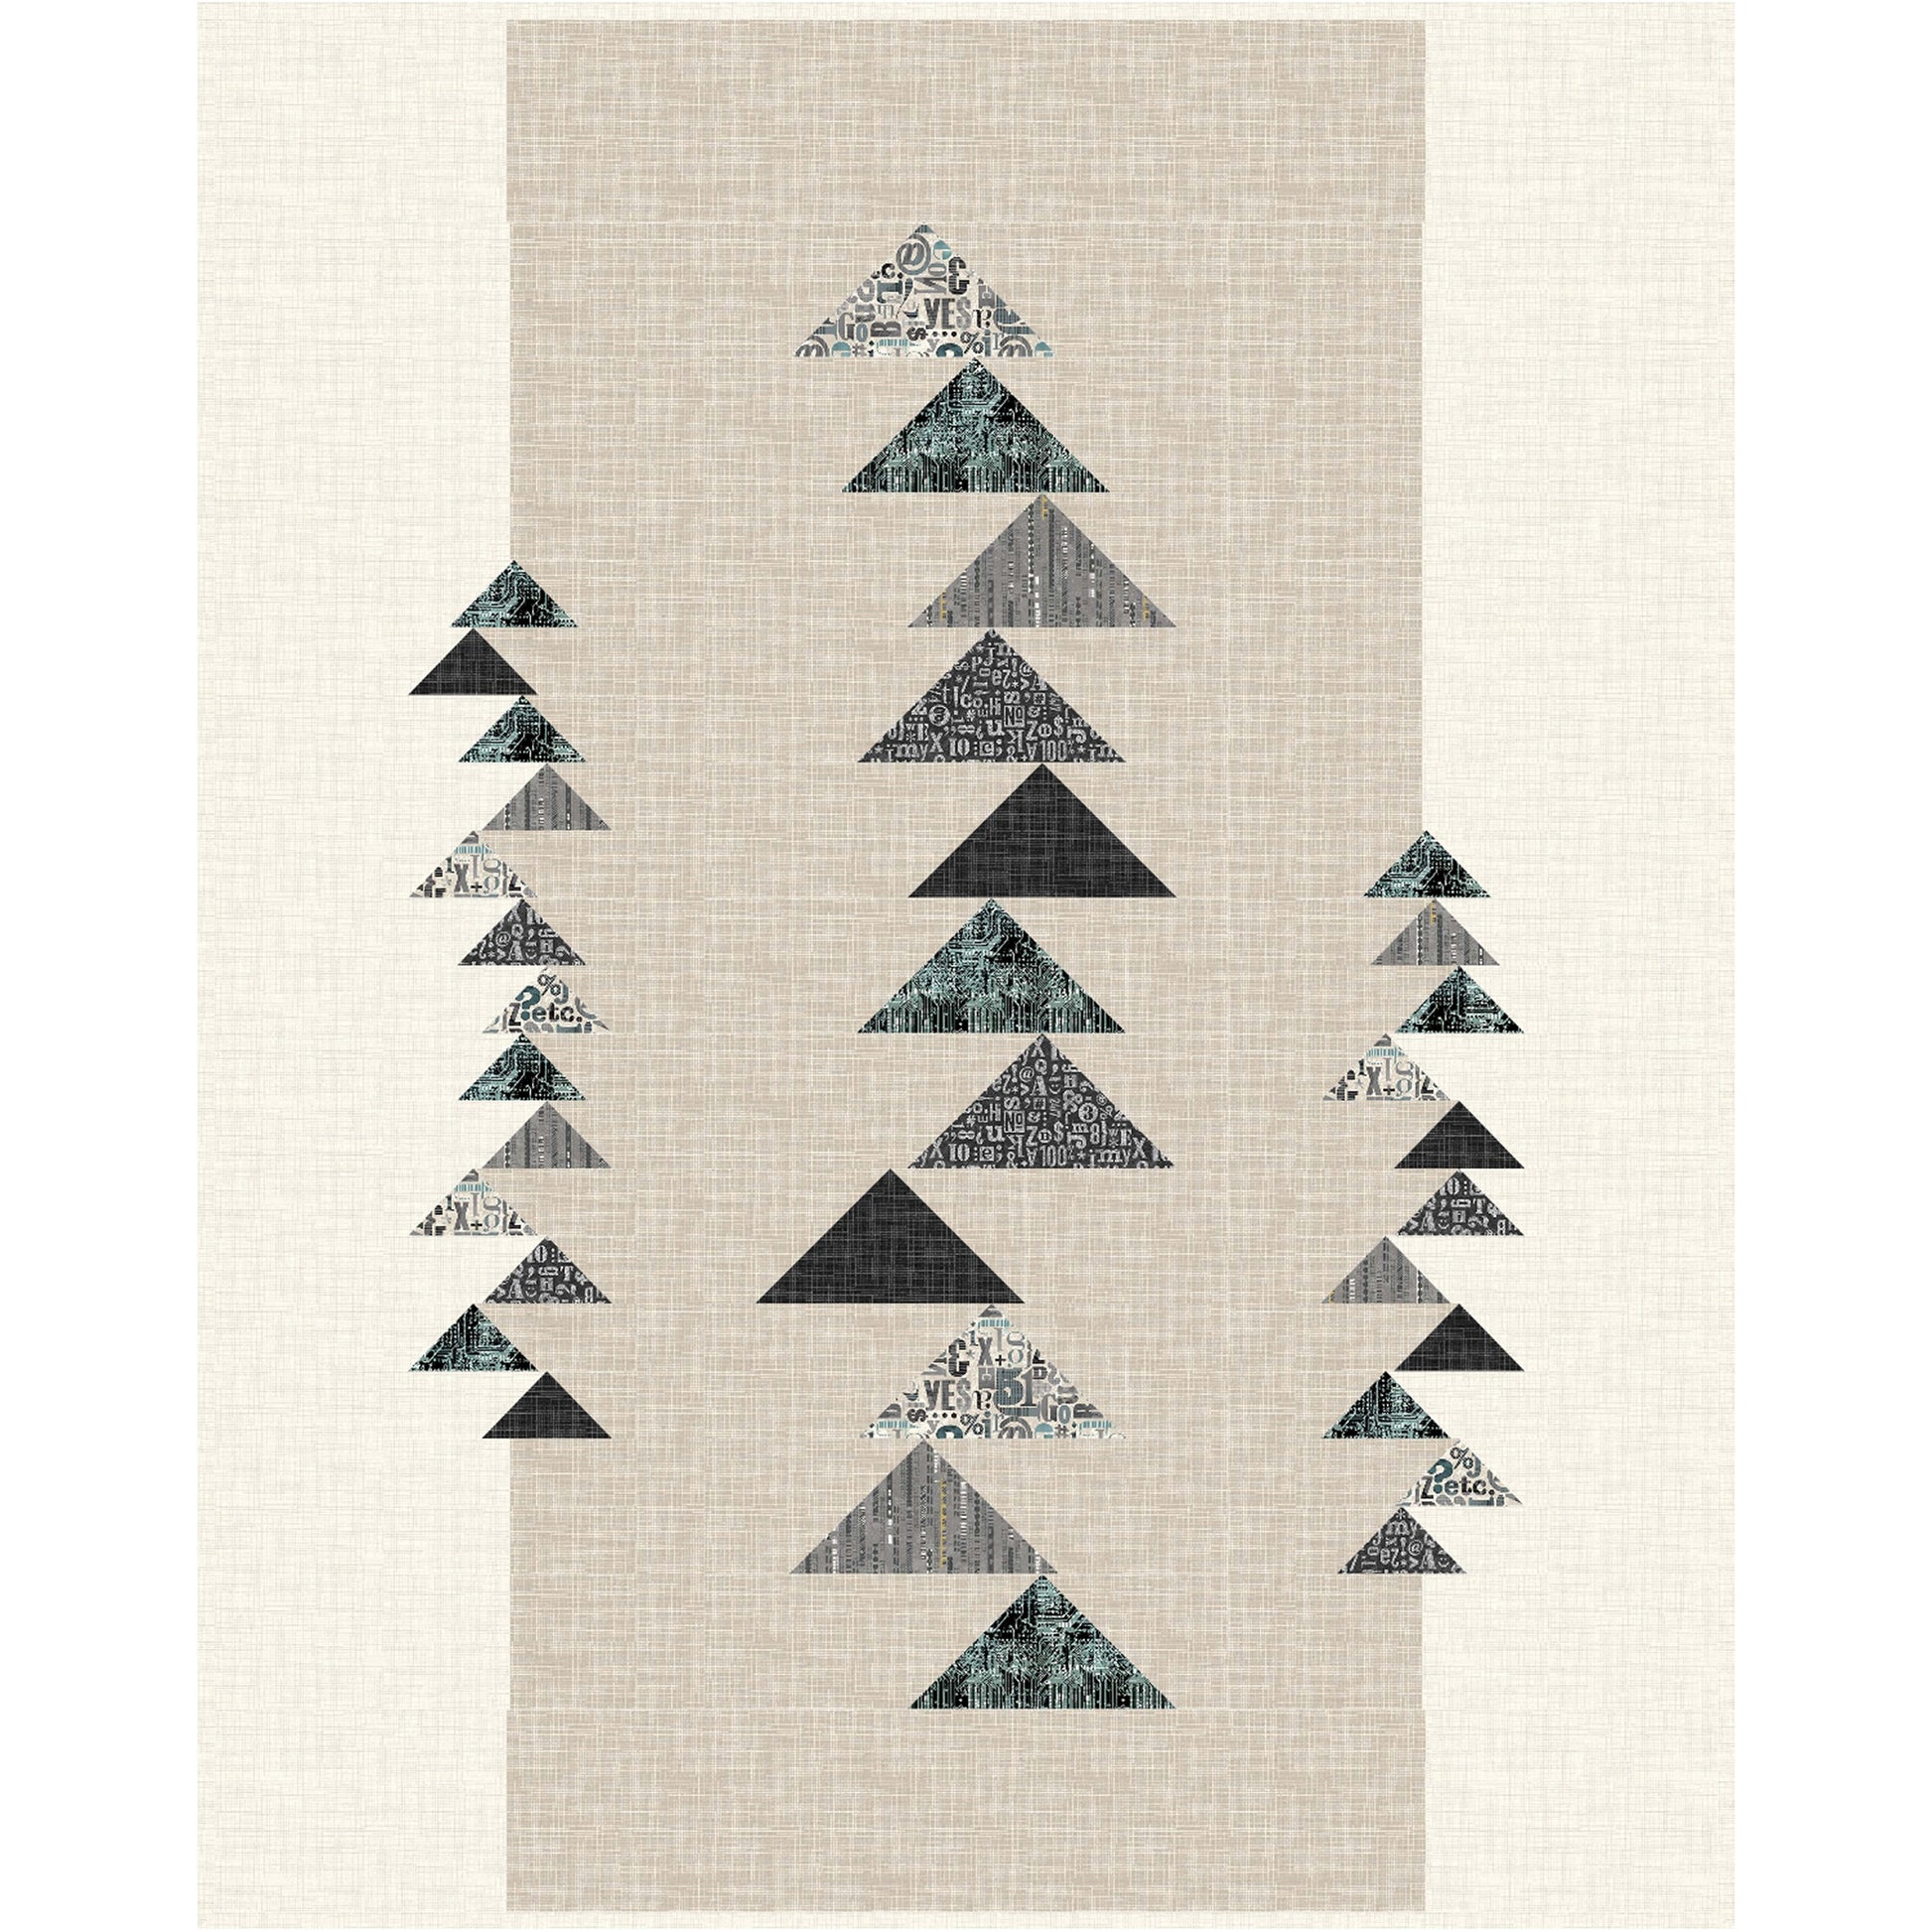 A quilt with colorful triangles with background of tan in the middle and cream on right and left.